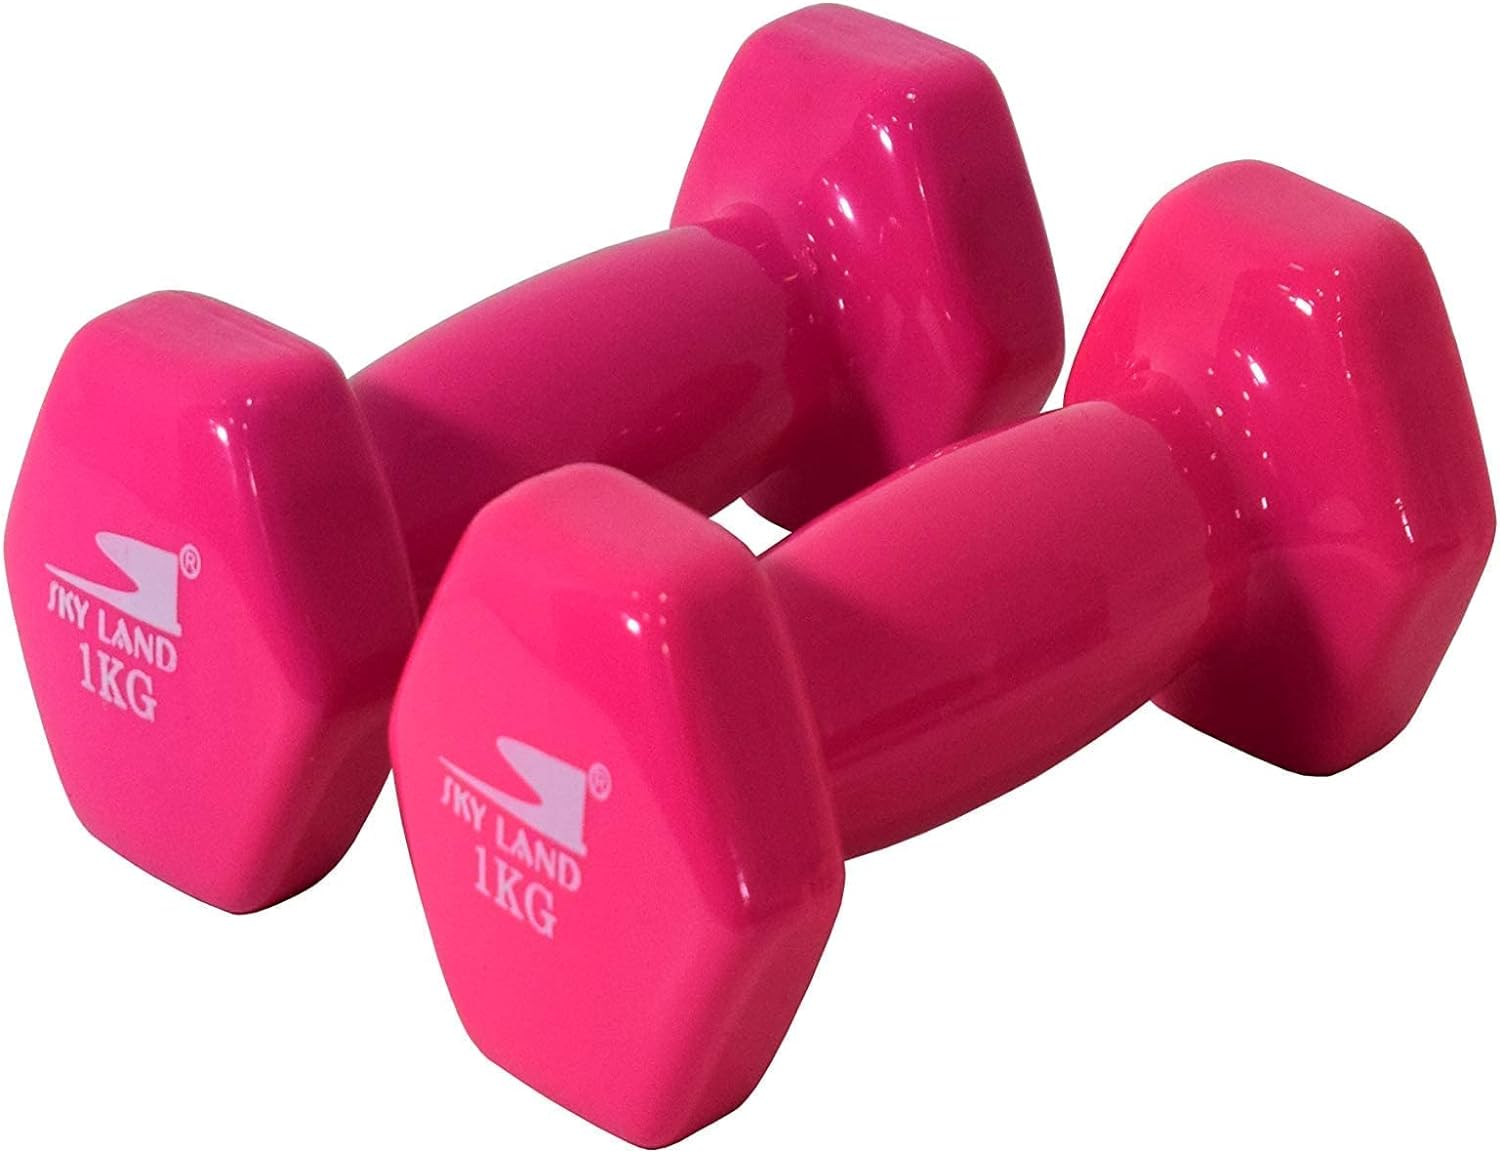 SKY LAND Classical Head Vinyl Dumbbells/Hand Weights Pair/Vinyl Coated Dumbbells for Home Gym, Exercise & Fitness Equipment Workouts/Strength Training/1Kg Dumbbells X 2 Pink/EM-9219-1